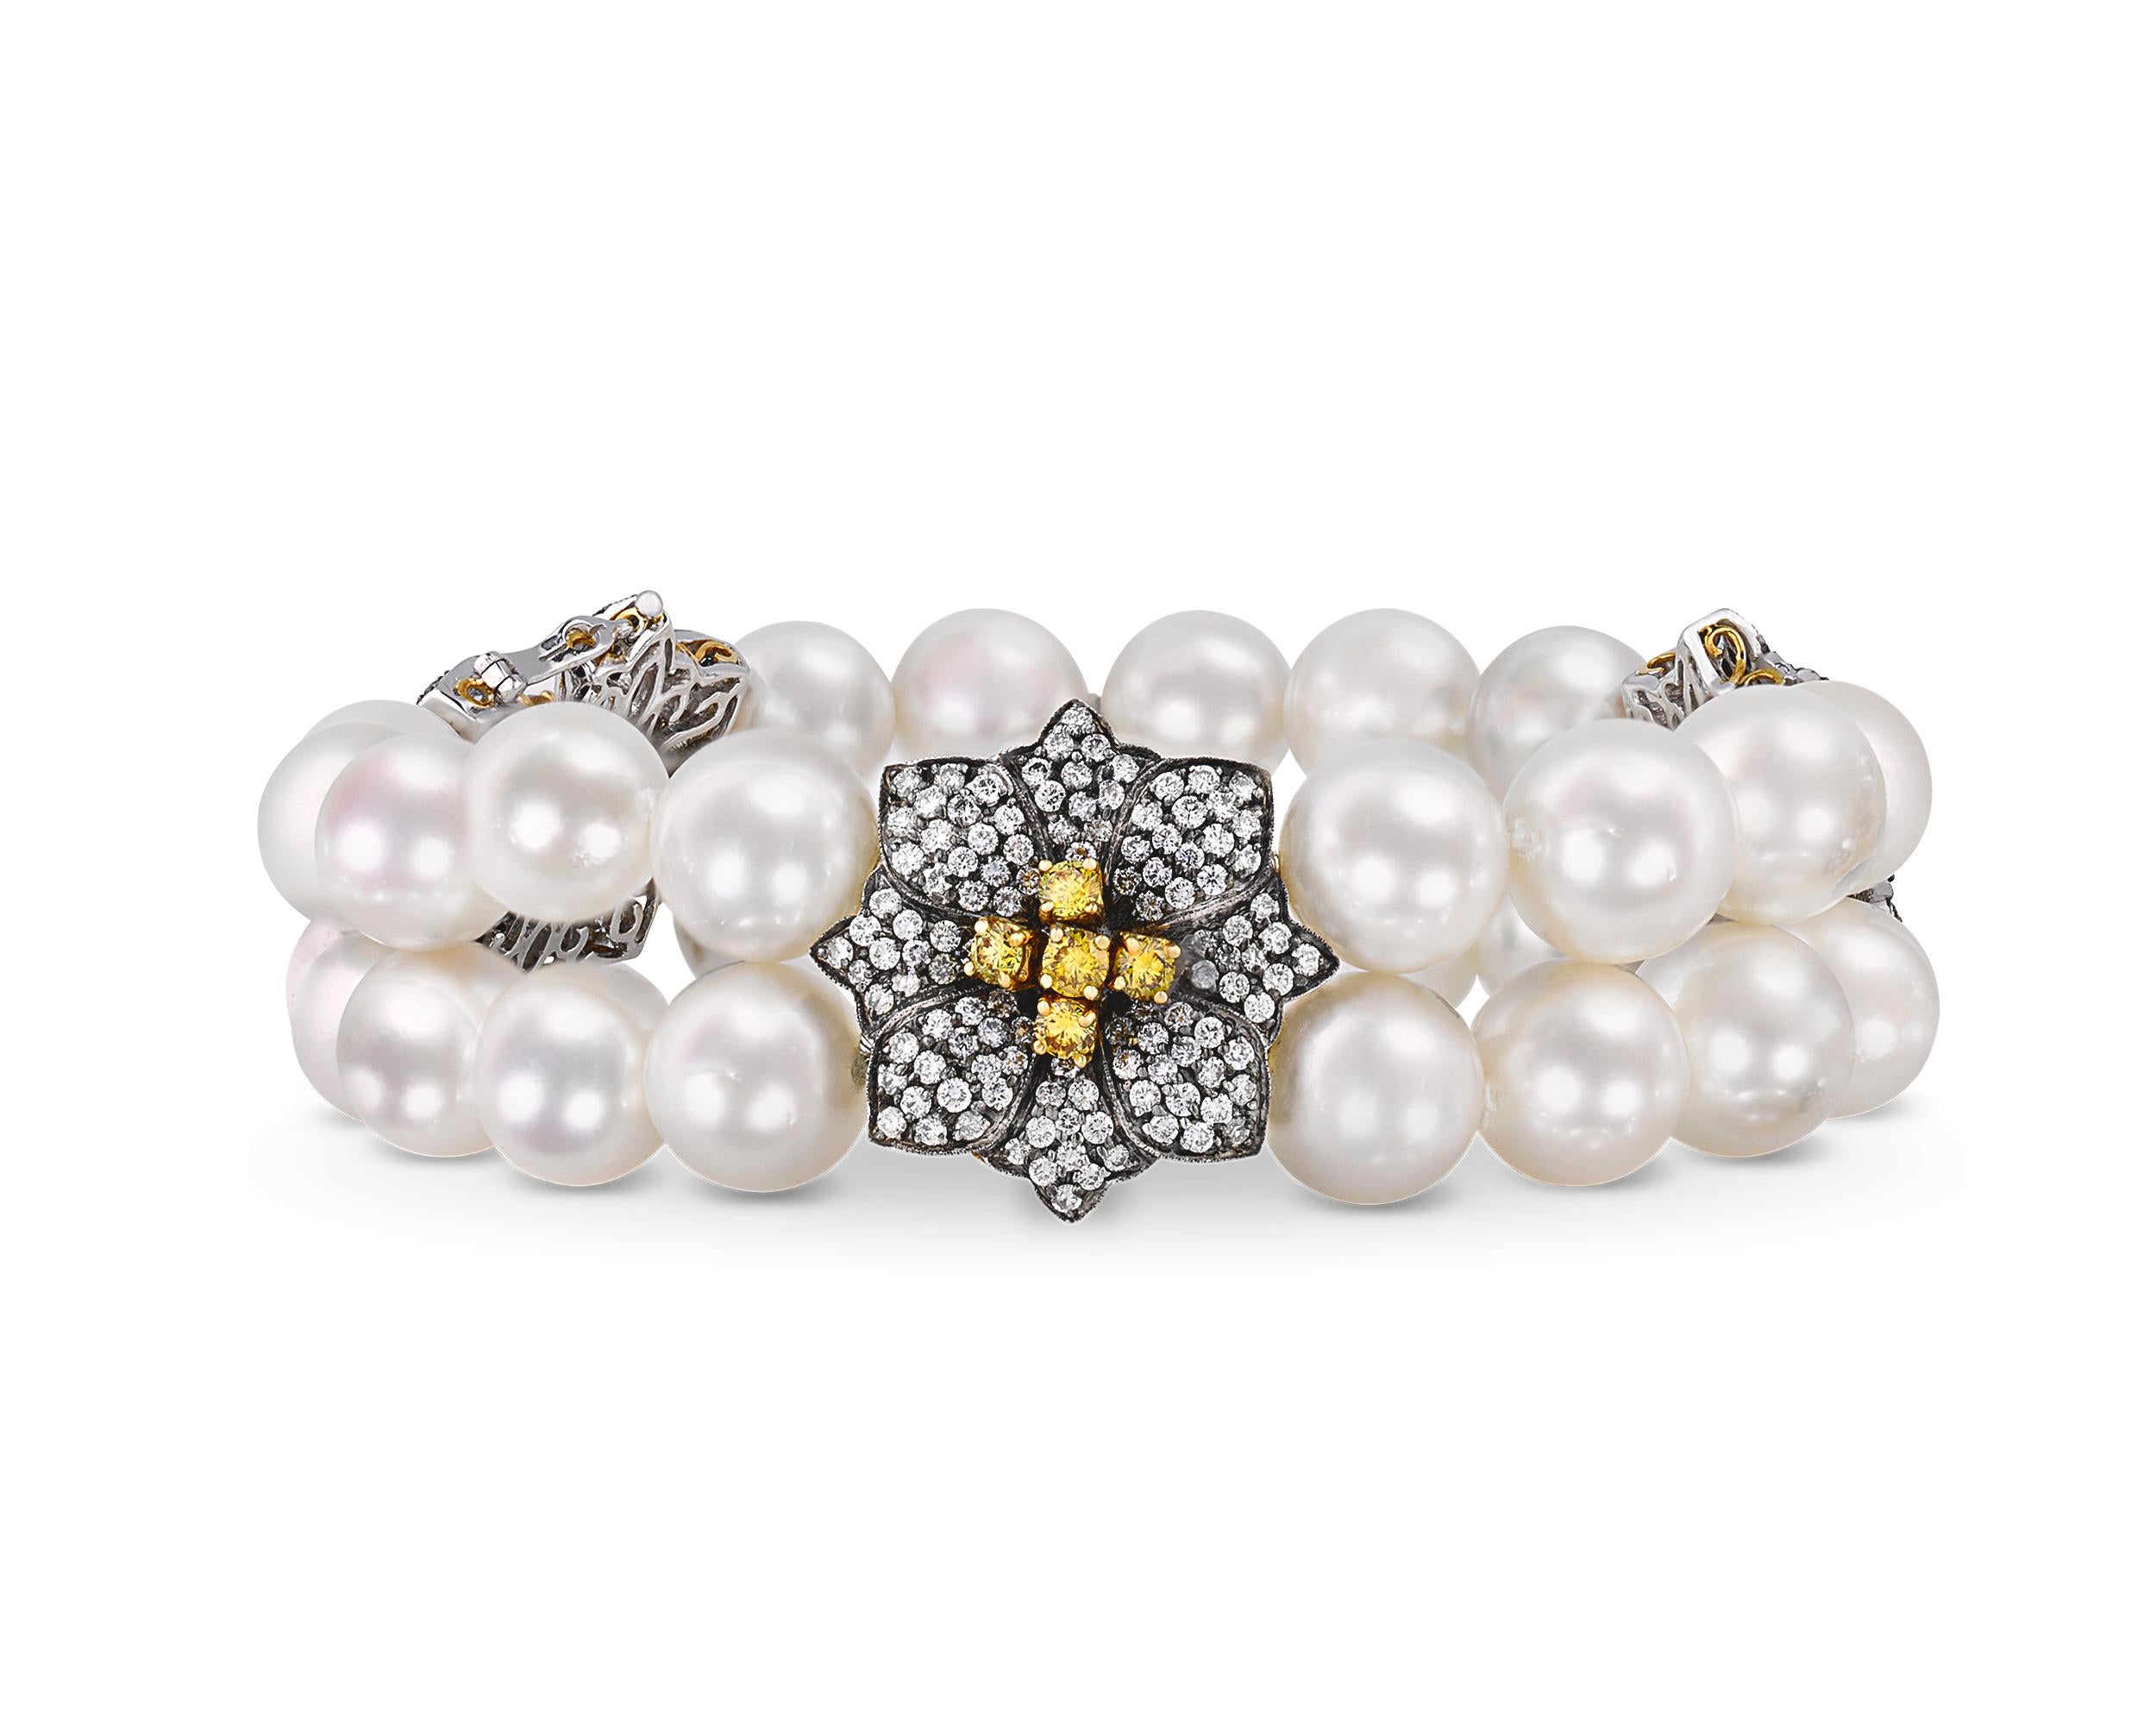 Two strands of South Sea pearls comprise this elegant bracelet, and the gems exhibit the perfect hue and luster for which pearls from the South Sea are renowned. Florets featuring vibrant yellow diamonds totaling 1.11 carats and white diamonds